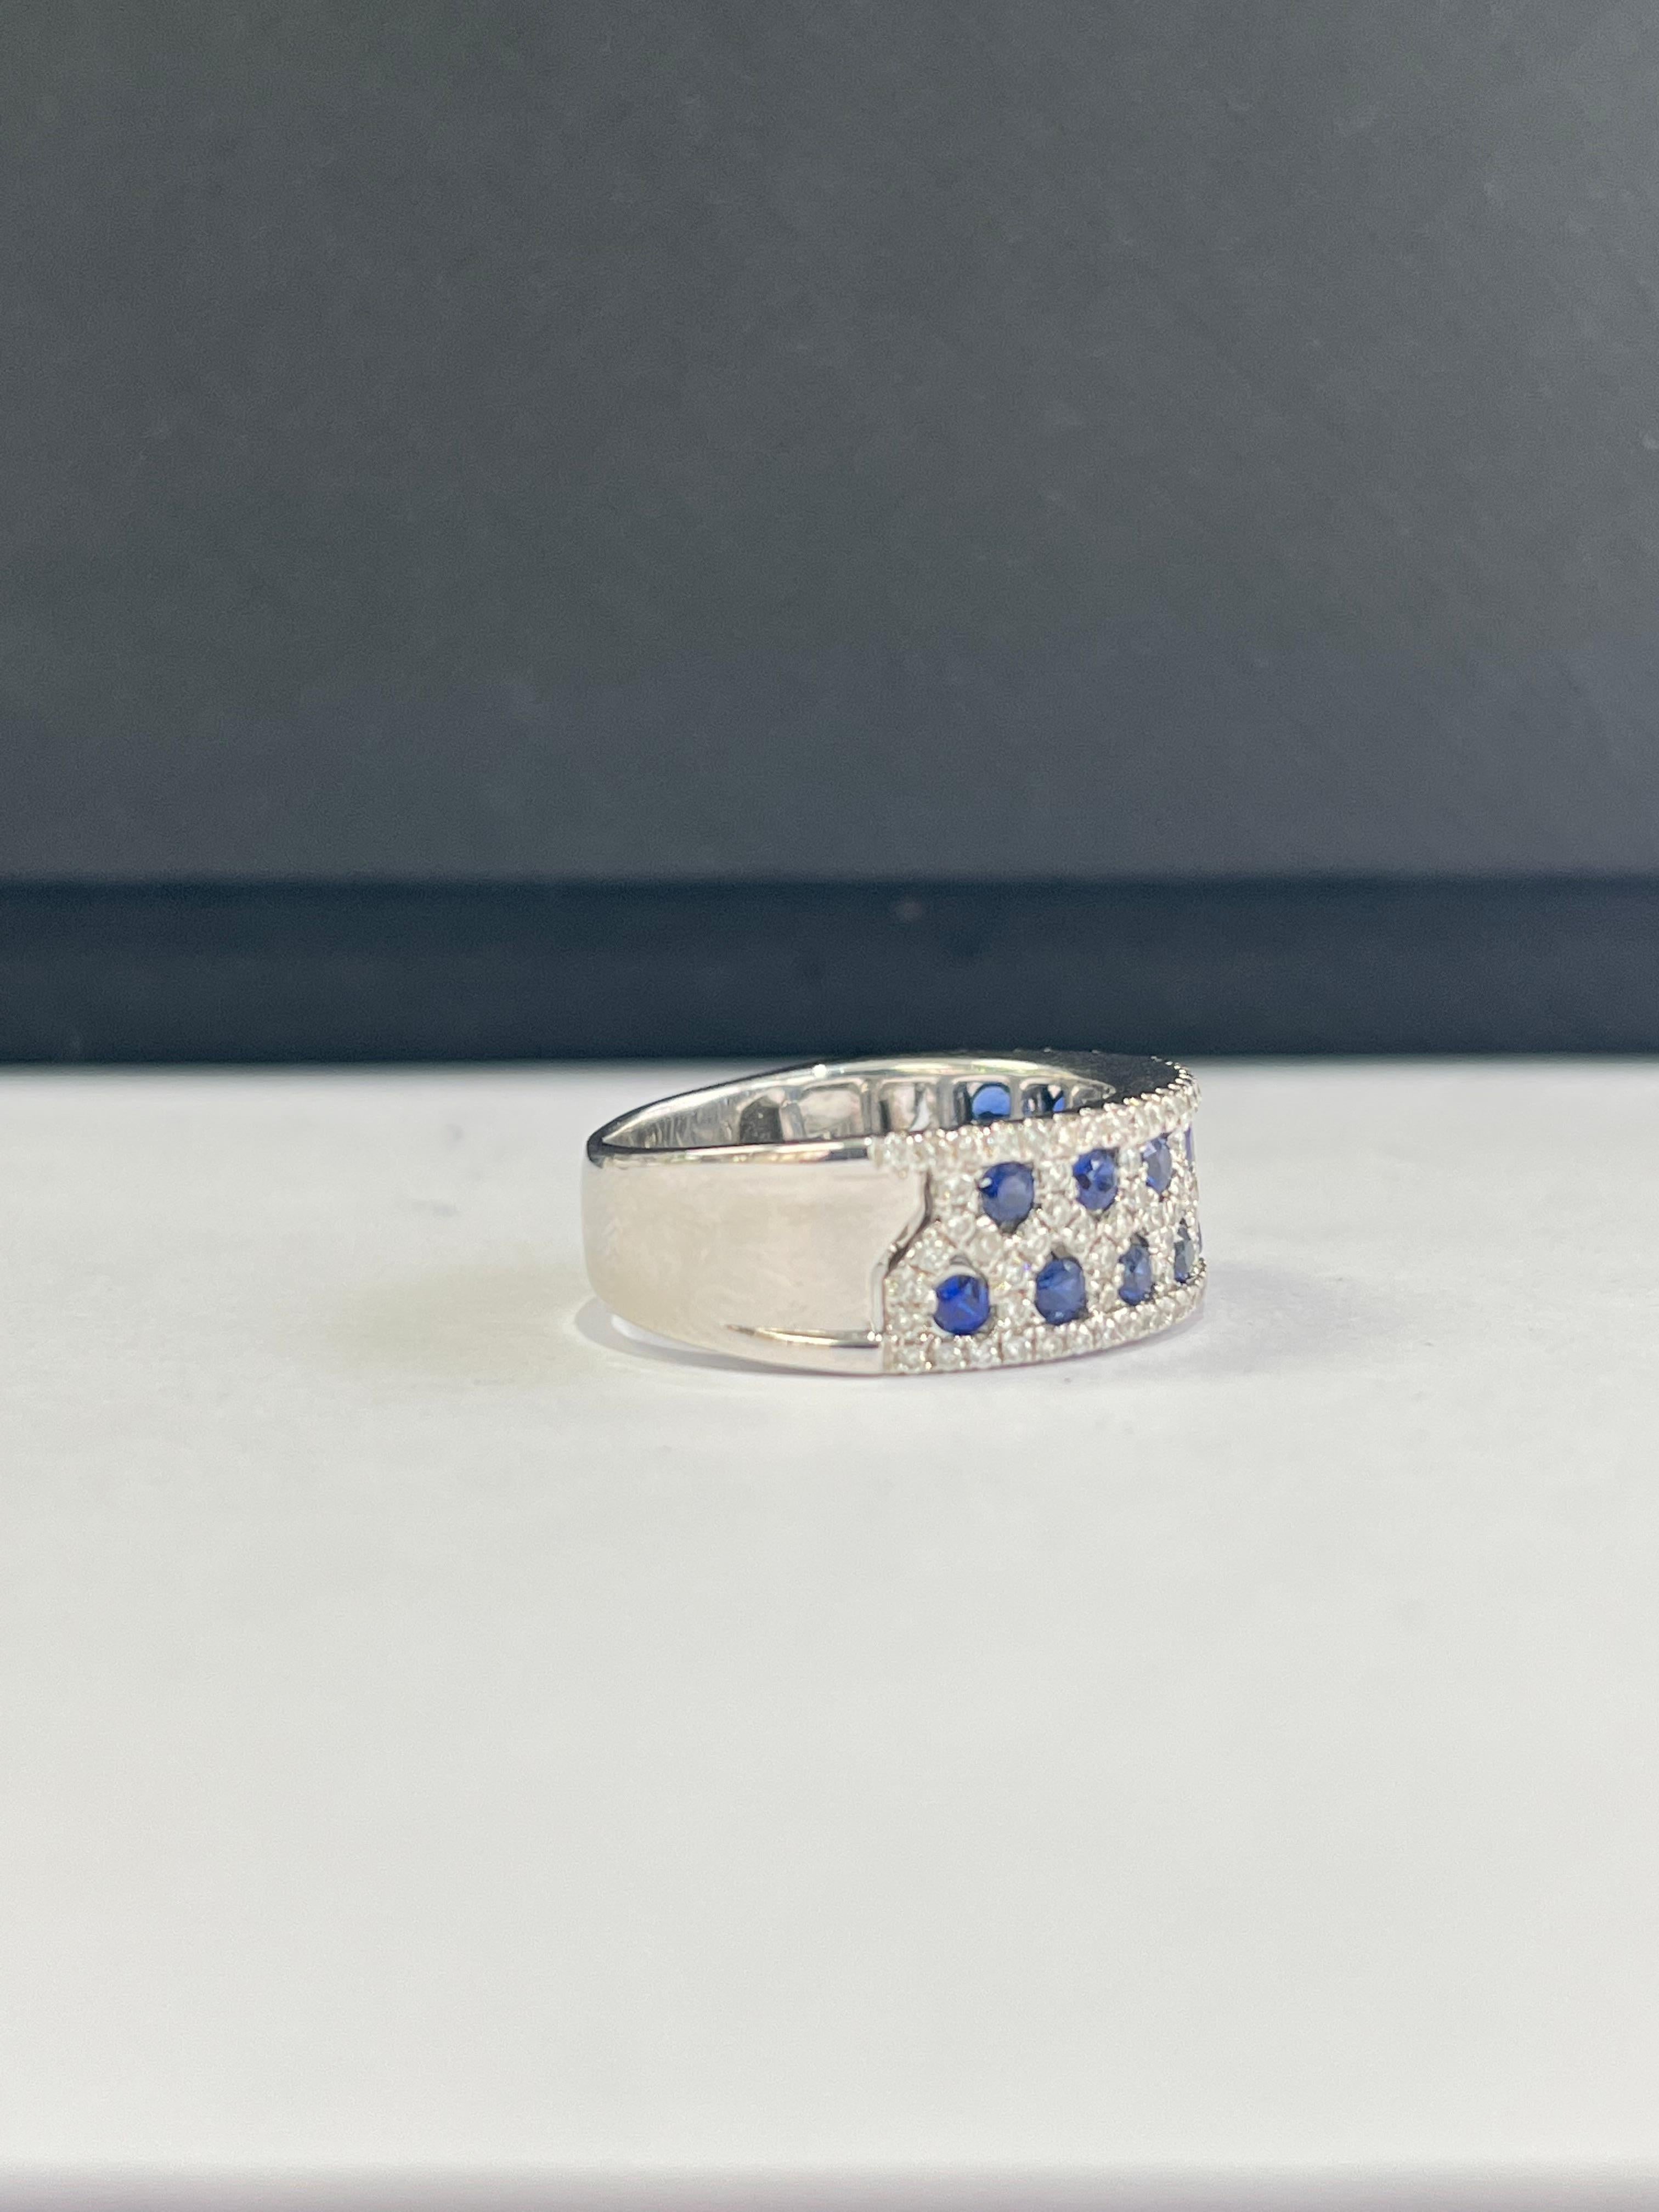 A very gorgeous and one of a kind, Blue Sapphire Band Ring set in 18K White Gold & Diamonds. The weight of the Blue Sapphires is 0.81 carats. The Blue Sapphires are of Ceylon (Sri Lankan) origin. The weight of the Diamonds is 0.70 carats. Net Gold